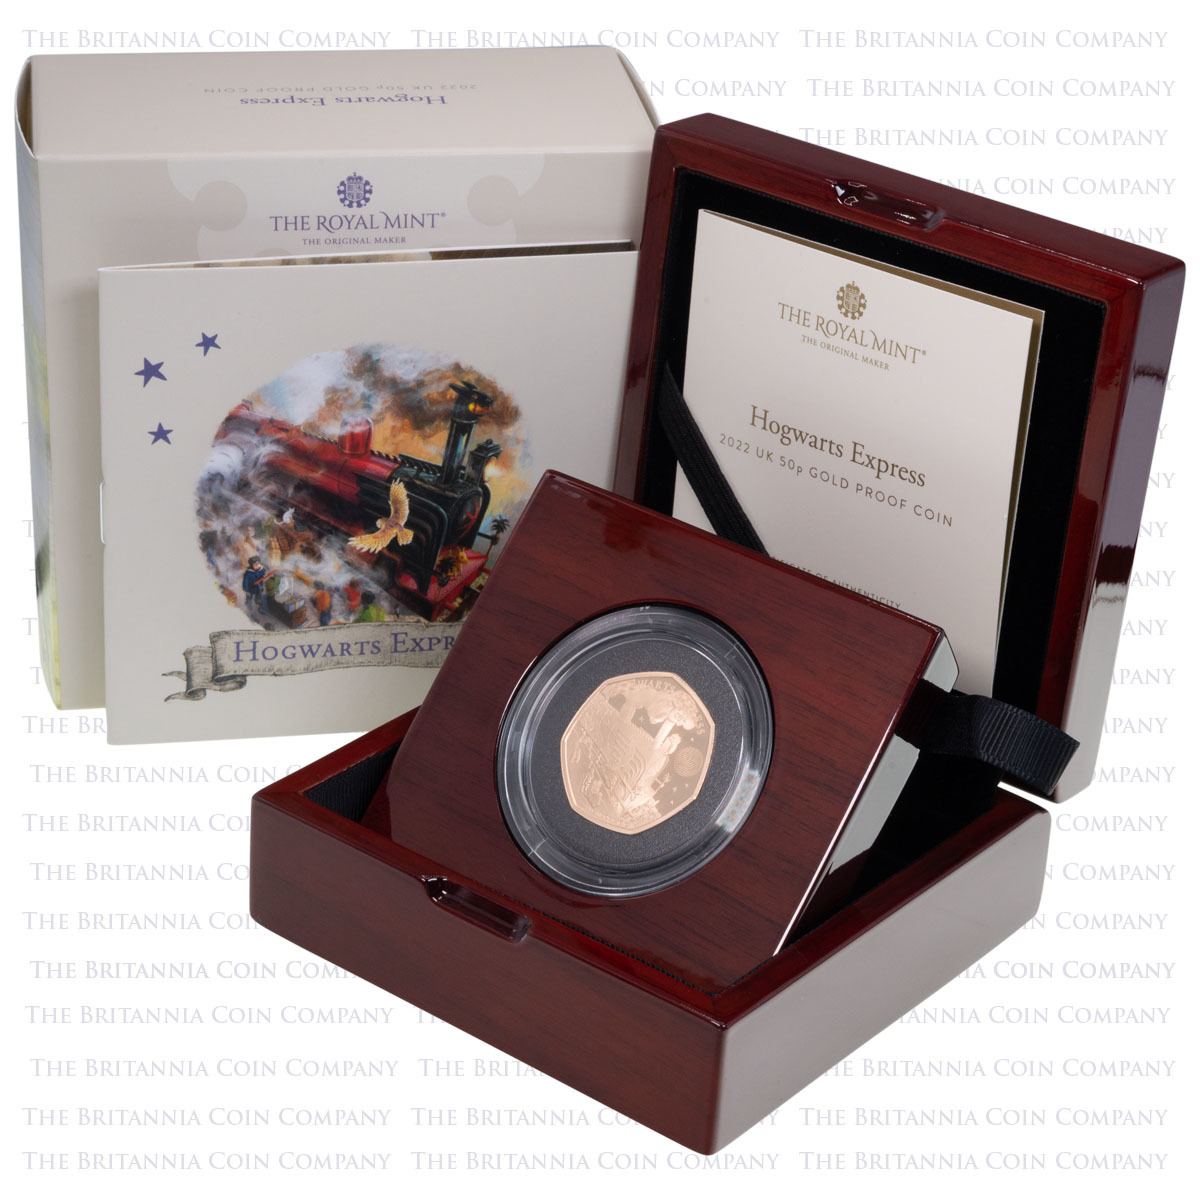 UK22HEGP 2022 Harry Potter Hogwarts Express Fifty Pence Gold Proof Coin Boxed